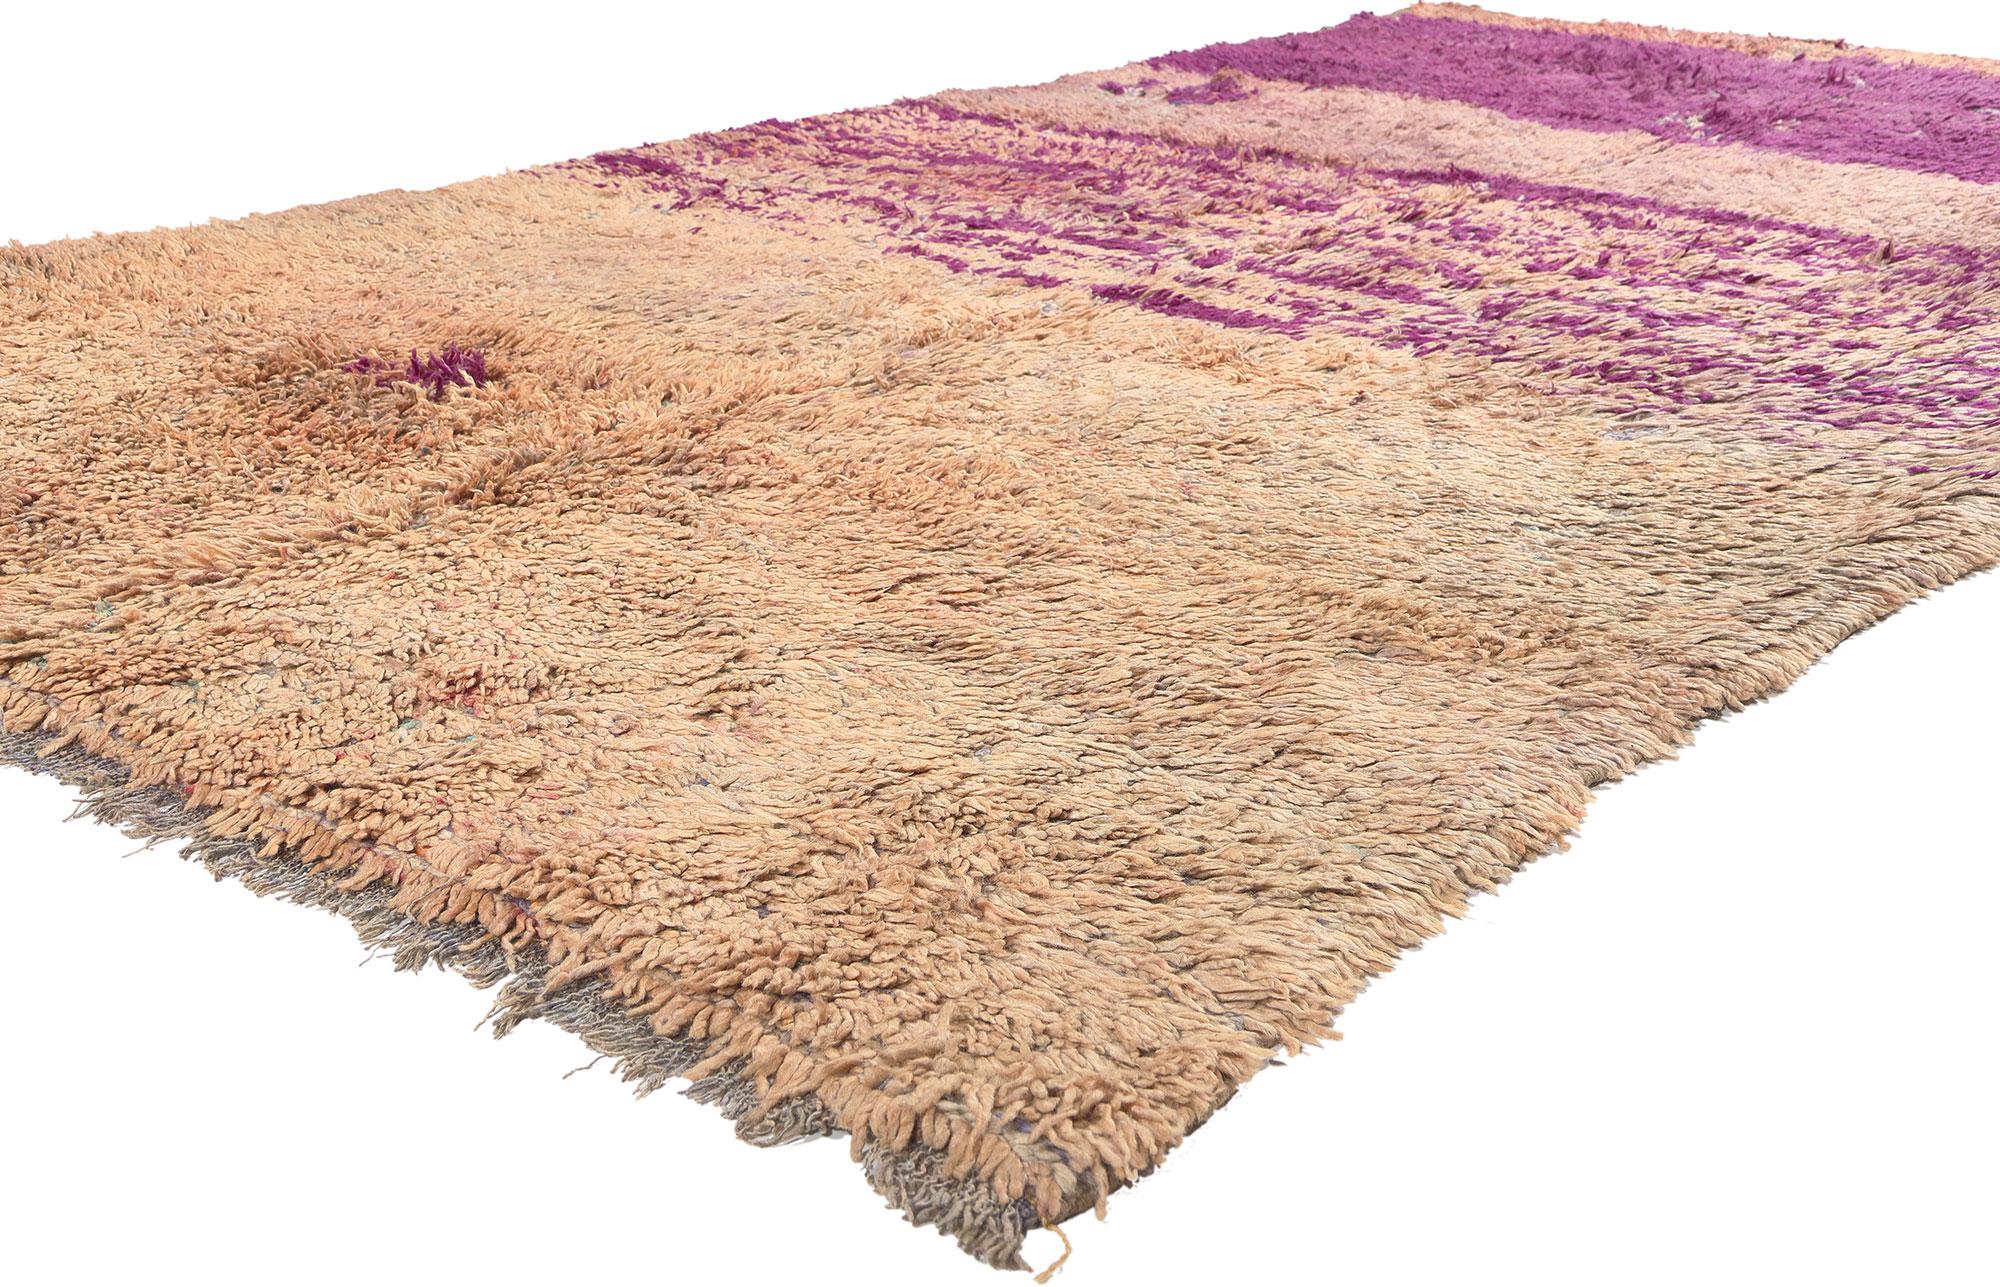 20519 Vintage Beni MGuild Moroccan Rug, 05’10 x 10’02.
Step into the embrace of woven beauty with this hand-knotted wool vintage Beni MGuild Moroccan rug—a captivating vision that seamlessly marries simplicity, plush pile, and Bohemian vibes. Bathed